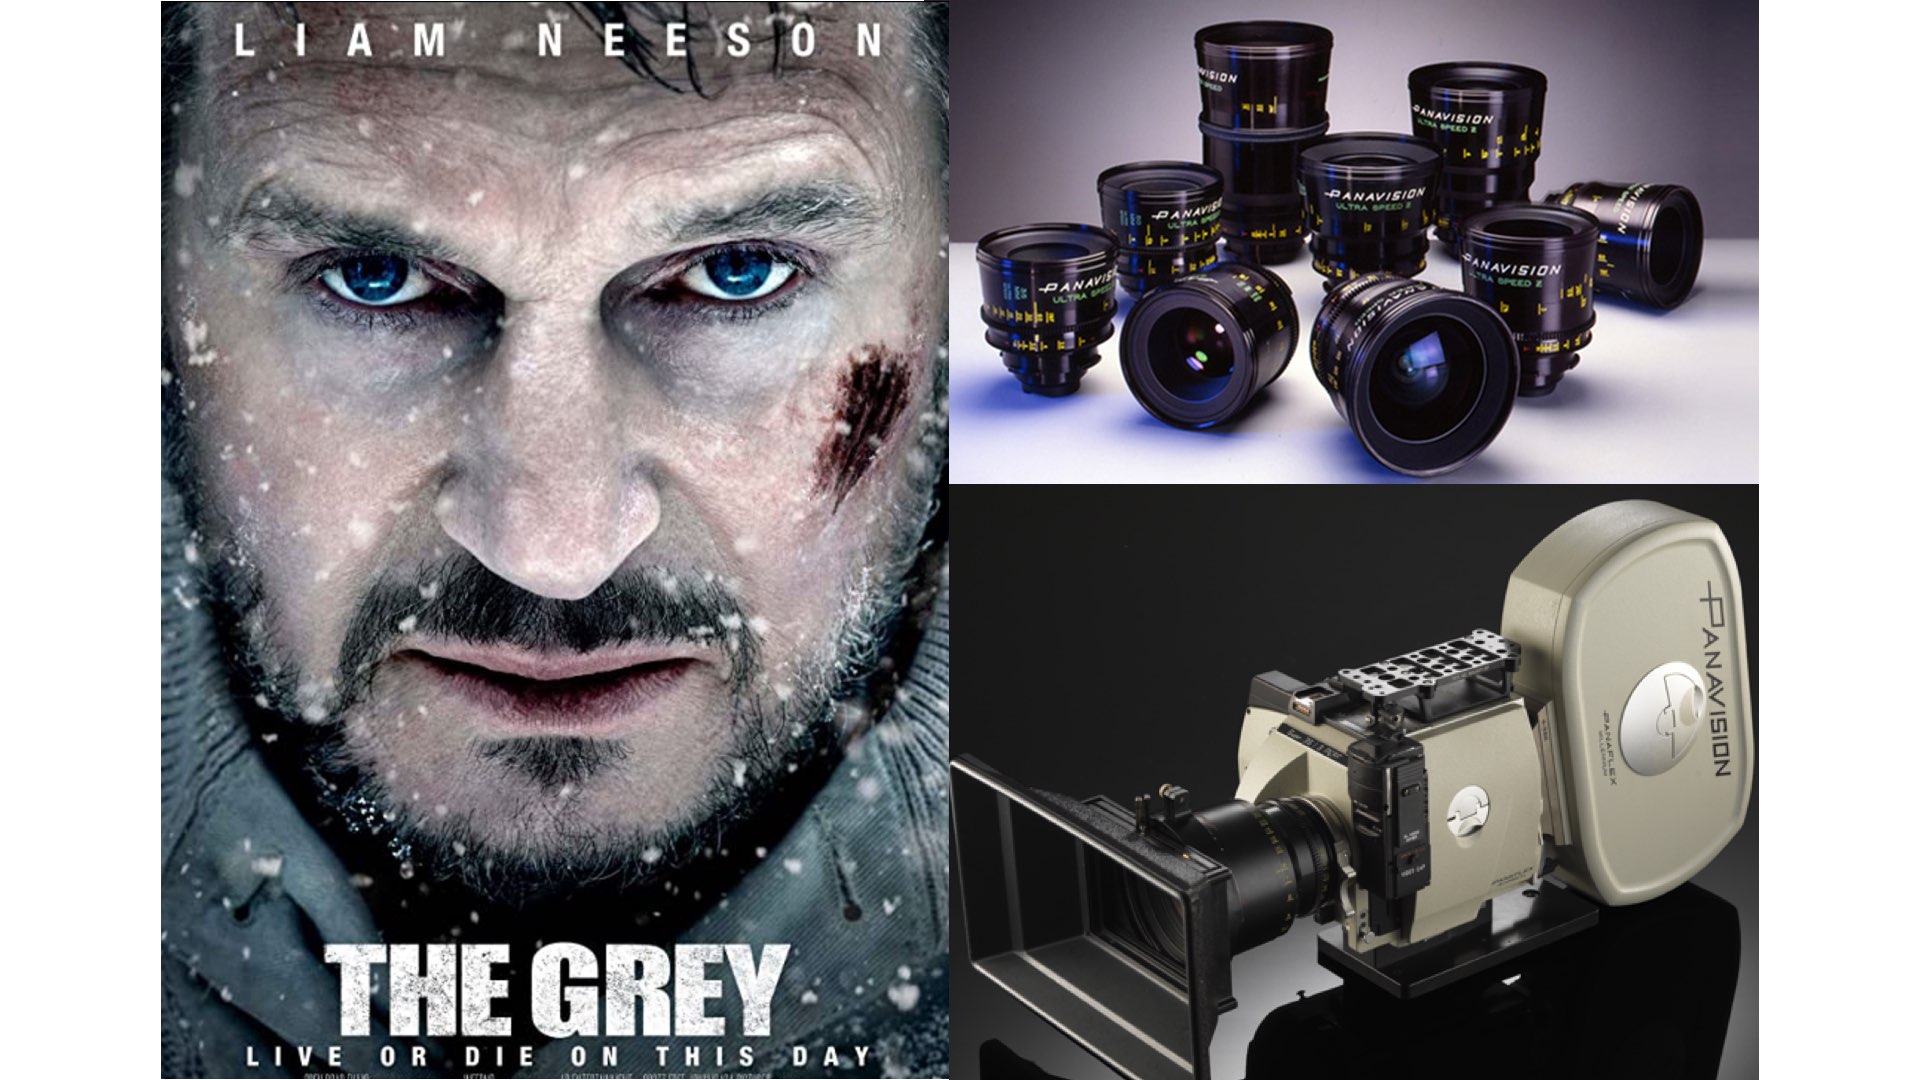 “The Grey” (2011): Cinematography Pushed to the Limit